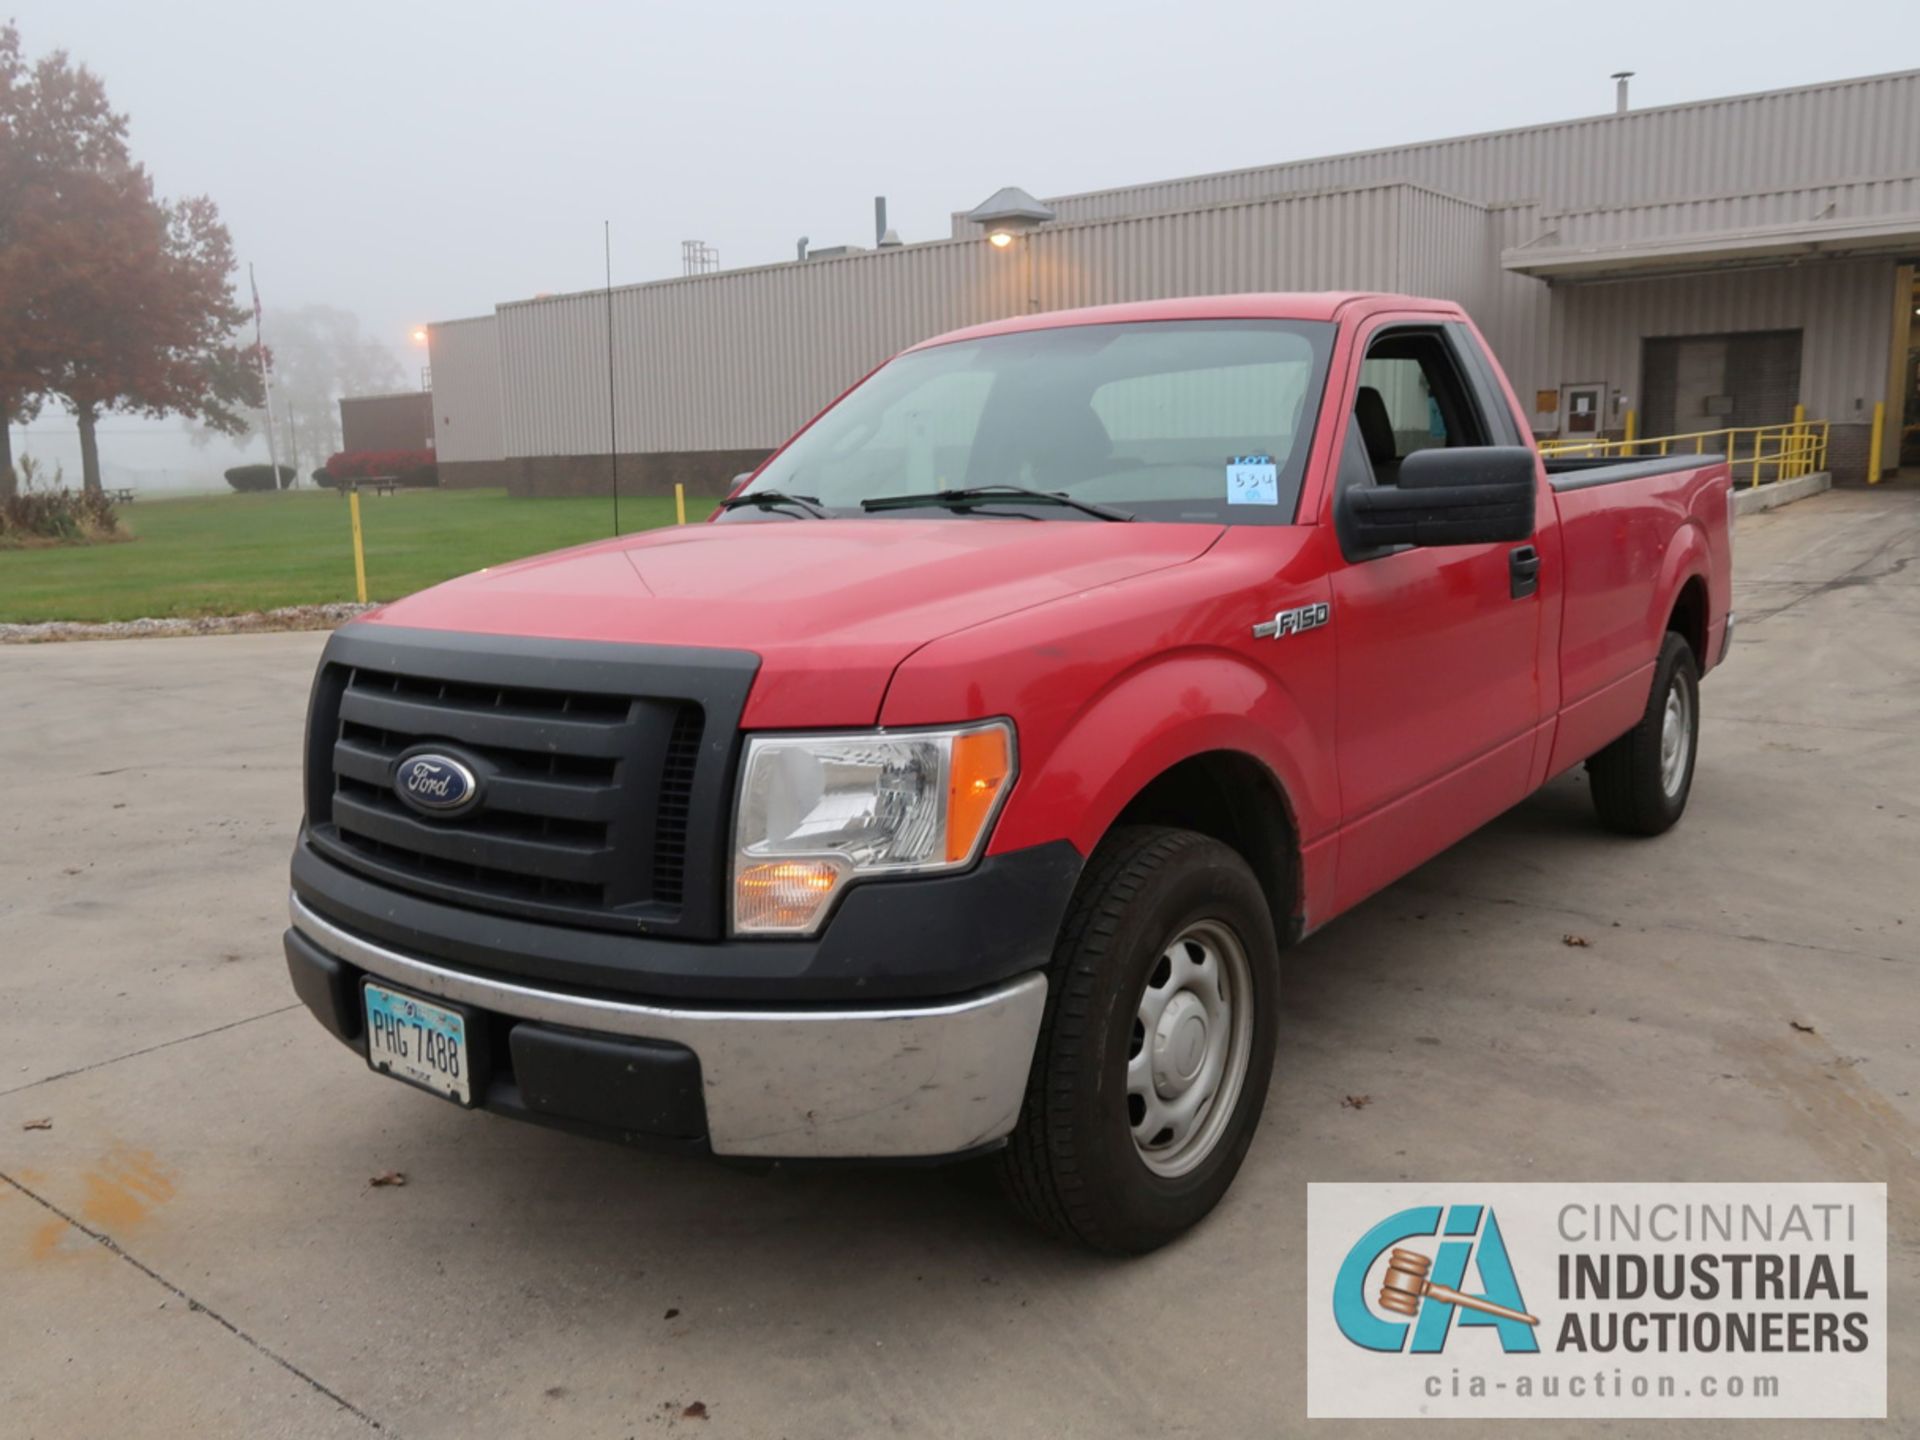 2010 FORD F-150 PICK UP TRUCK; VIN # 1FTMF1CW3AKE02719, 4.62 TRITON GAS ENGINE, AUTOMATIC